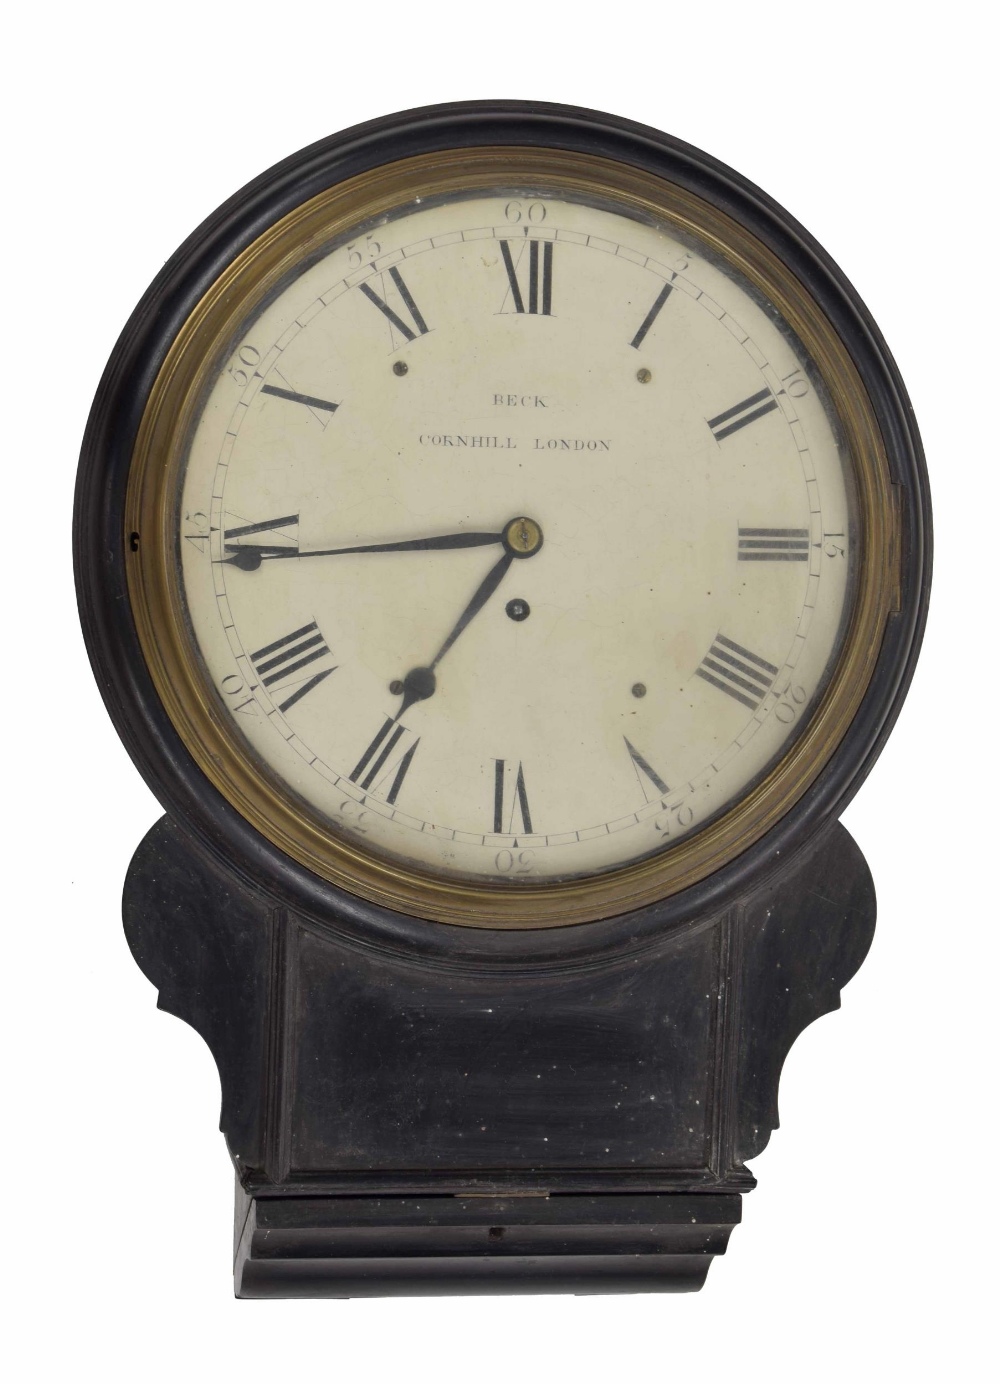 Ebonised single fusee 12" drop dial wall clock signed Beck, Cornhill, London, within a turned